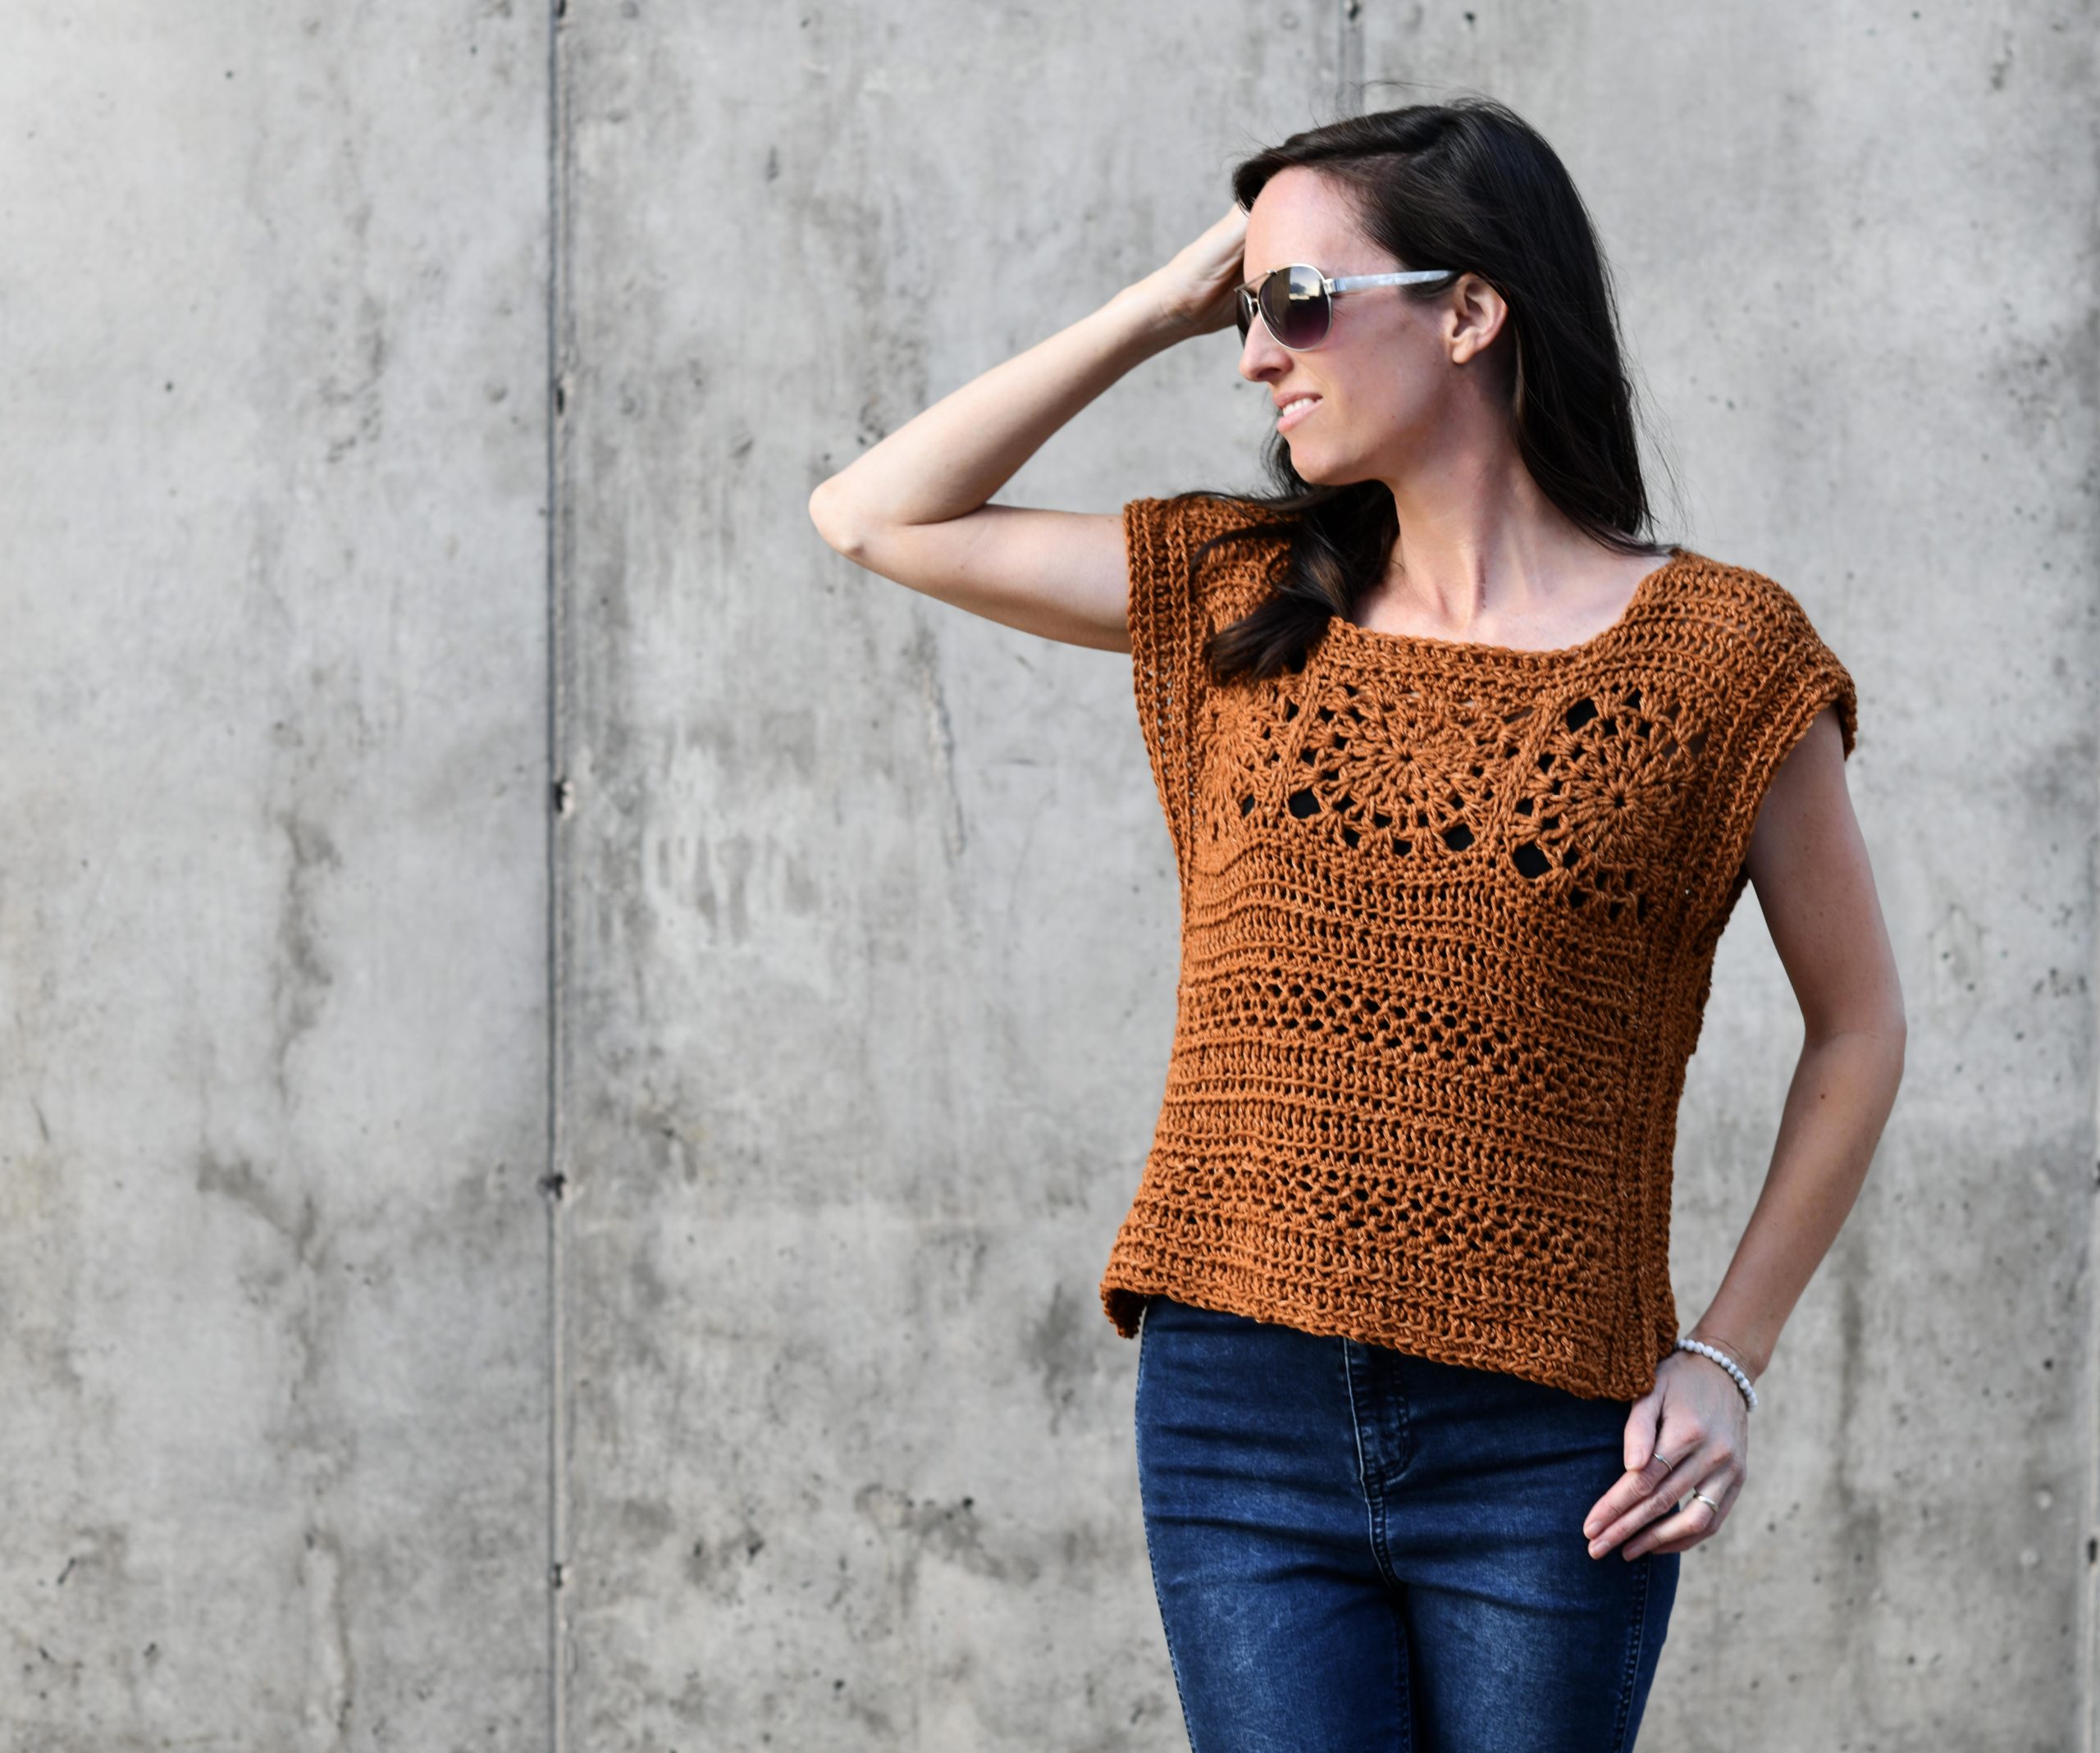 How To Crochet A Summer Boho Top – Free Pattern